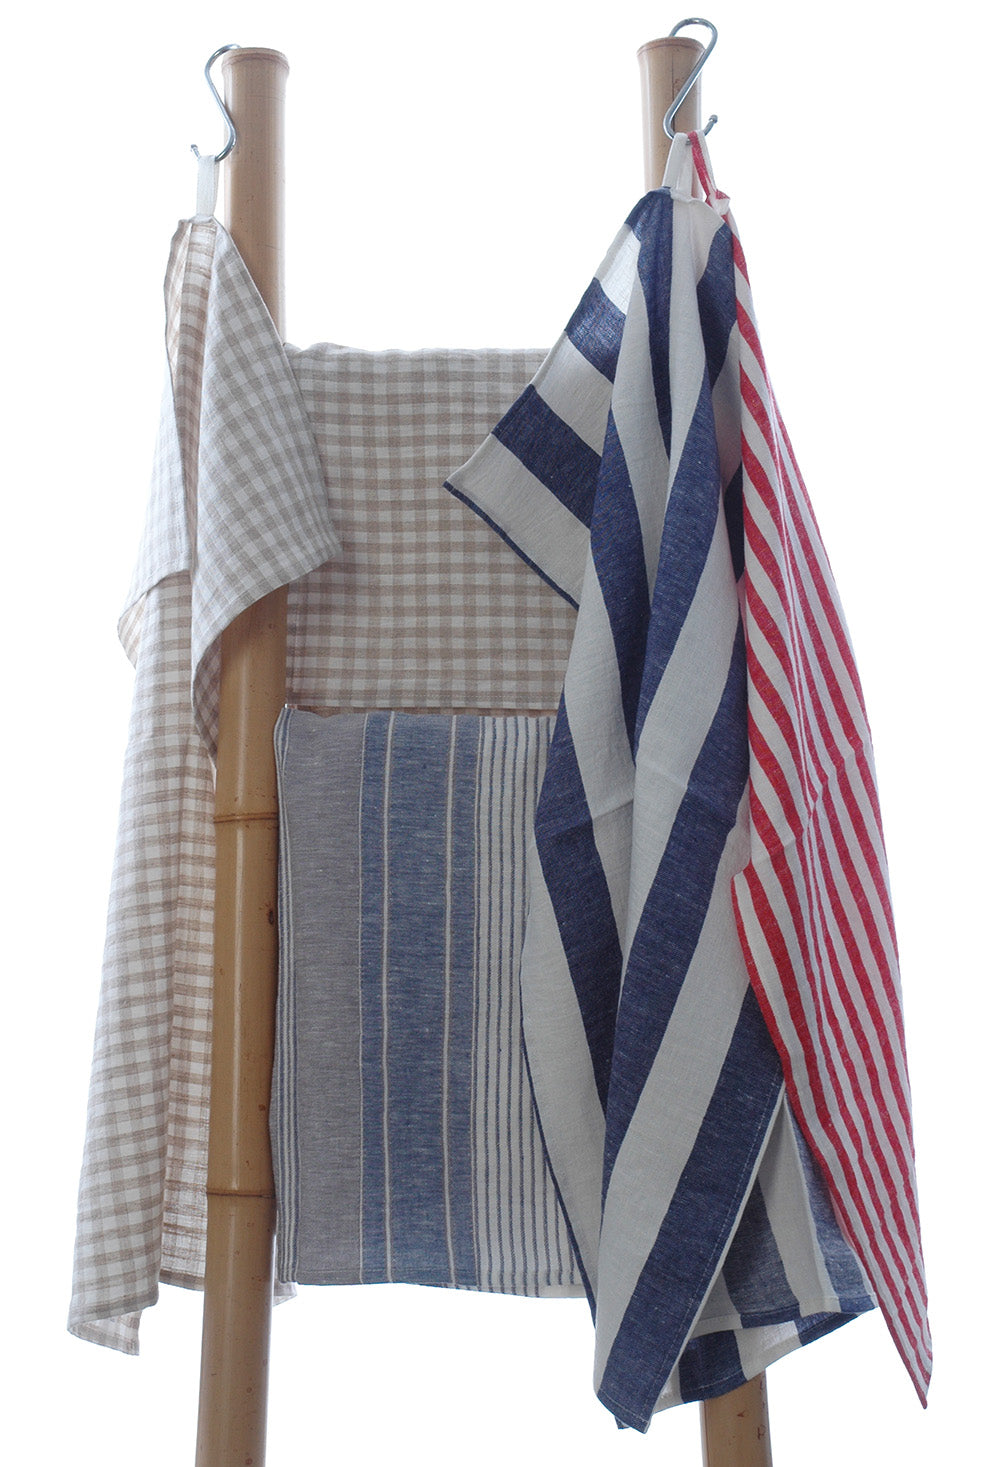 large Pure Linen Tea Towels in Red and White Stripe 75x50cm